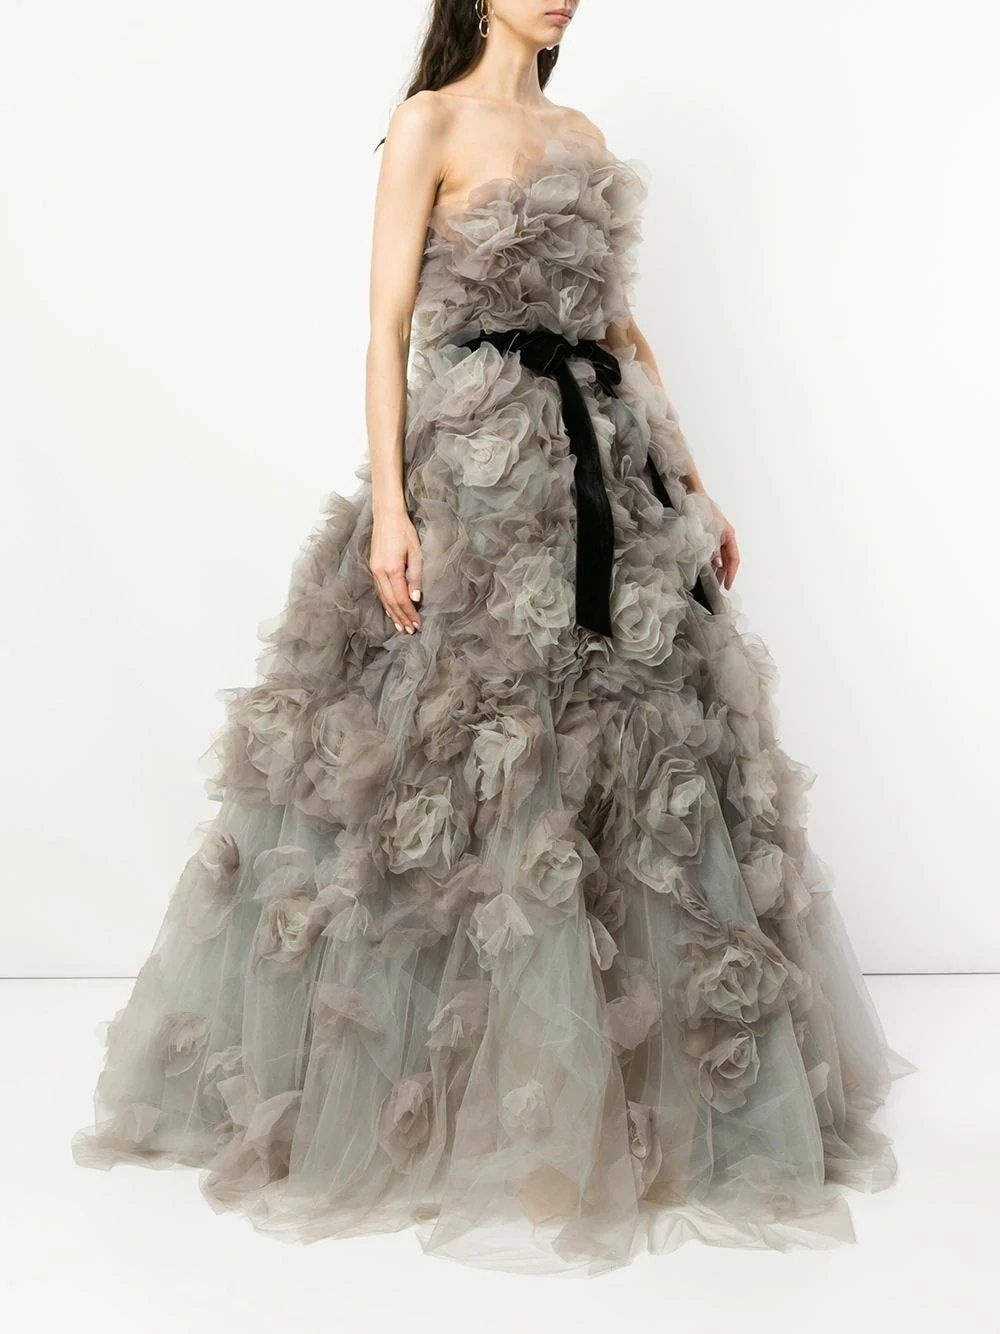 Strapless Gray Tulle Lace-Up 3D Flowers Lush Evening Dress Evening & Formal Dresses BlissGown 